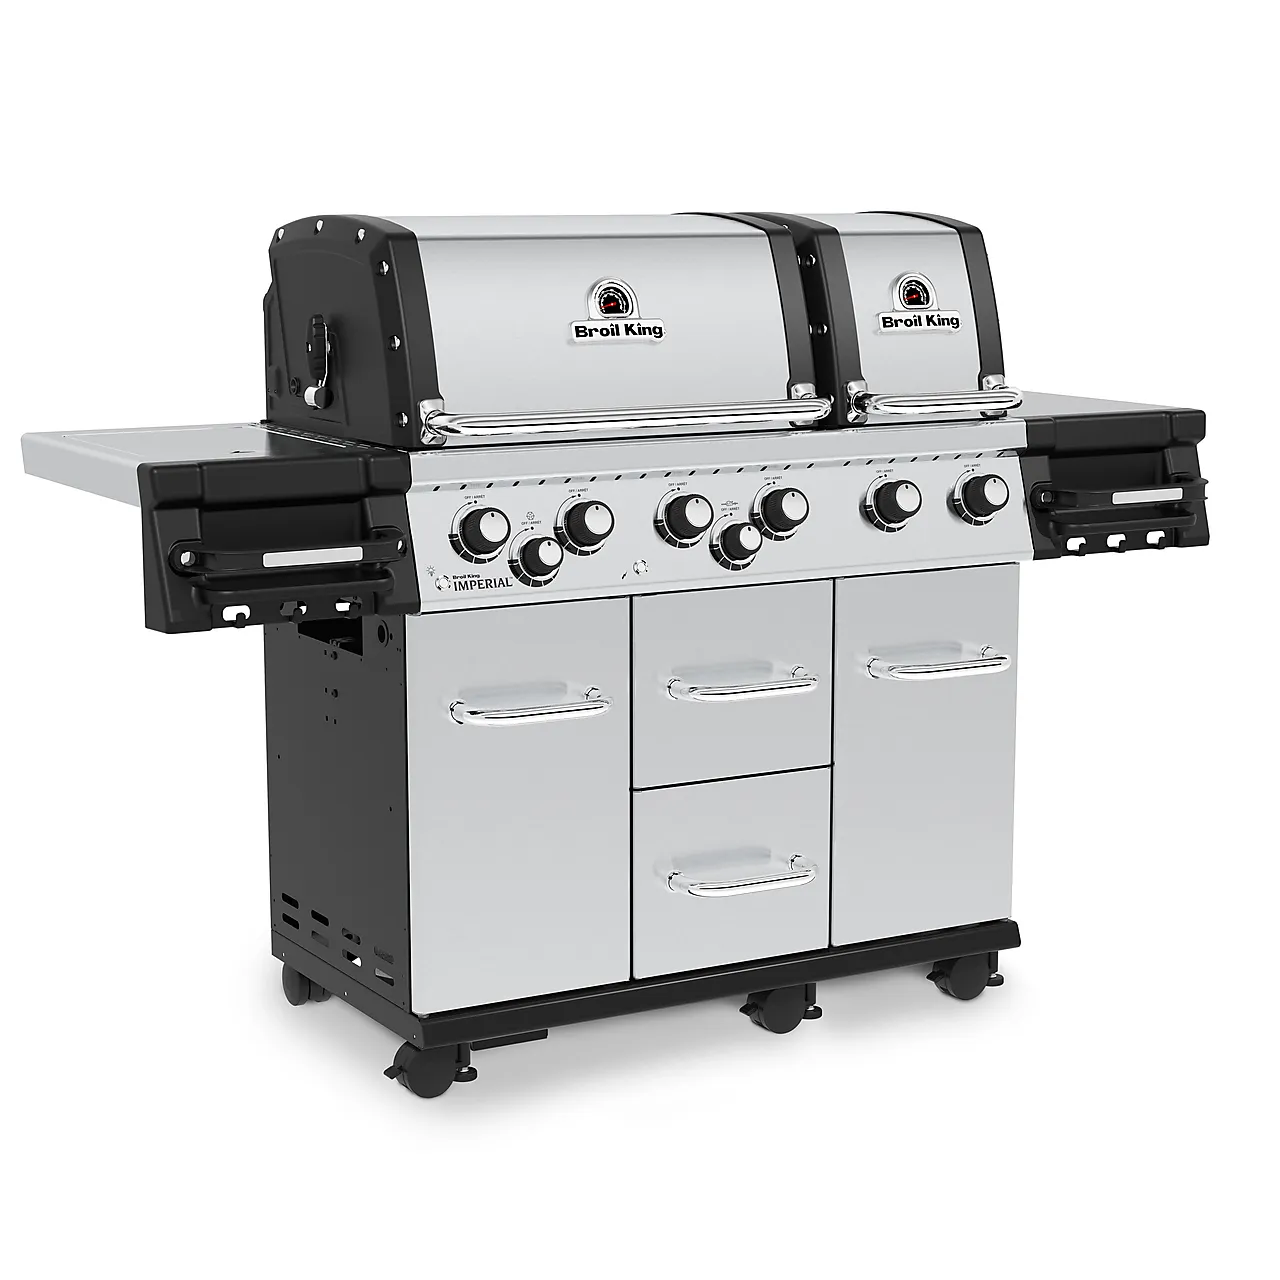 Gassgrill Imperial S 690 IR null - null - 18